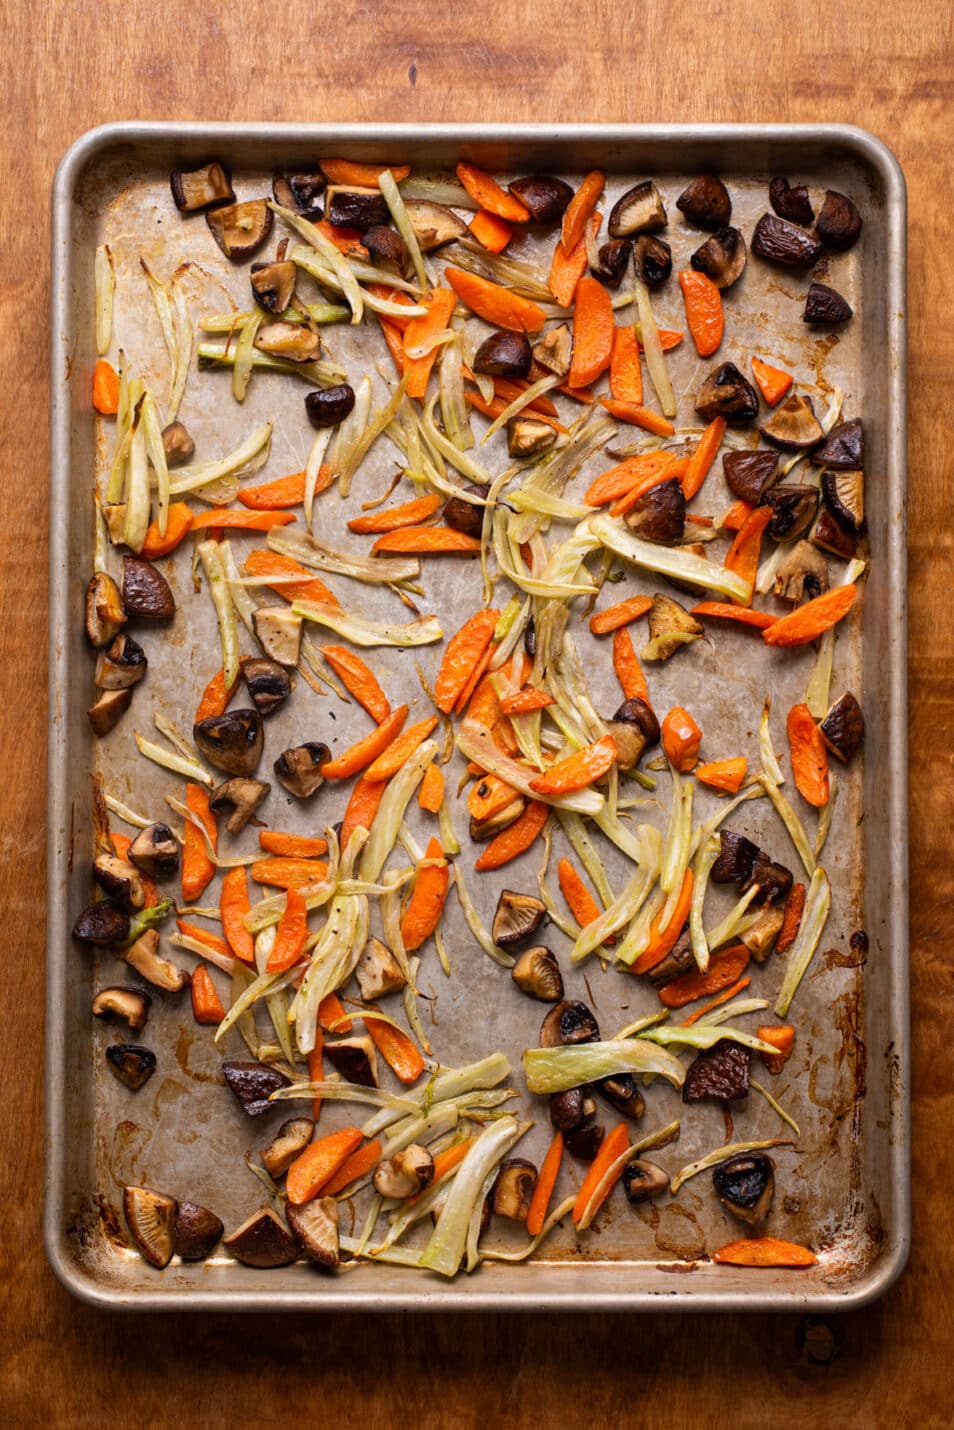 Roasted carrots, fennel, and mushrooms on a baking sheet.